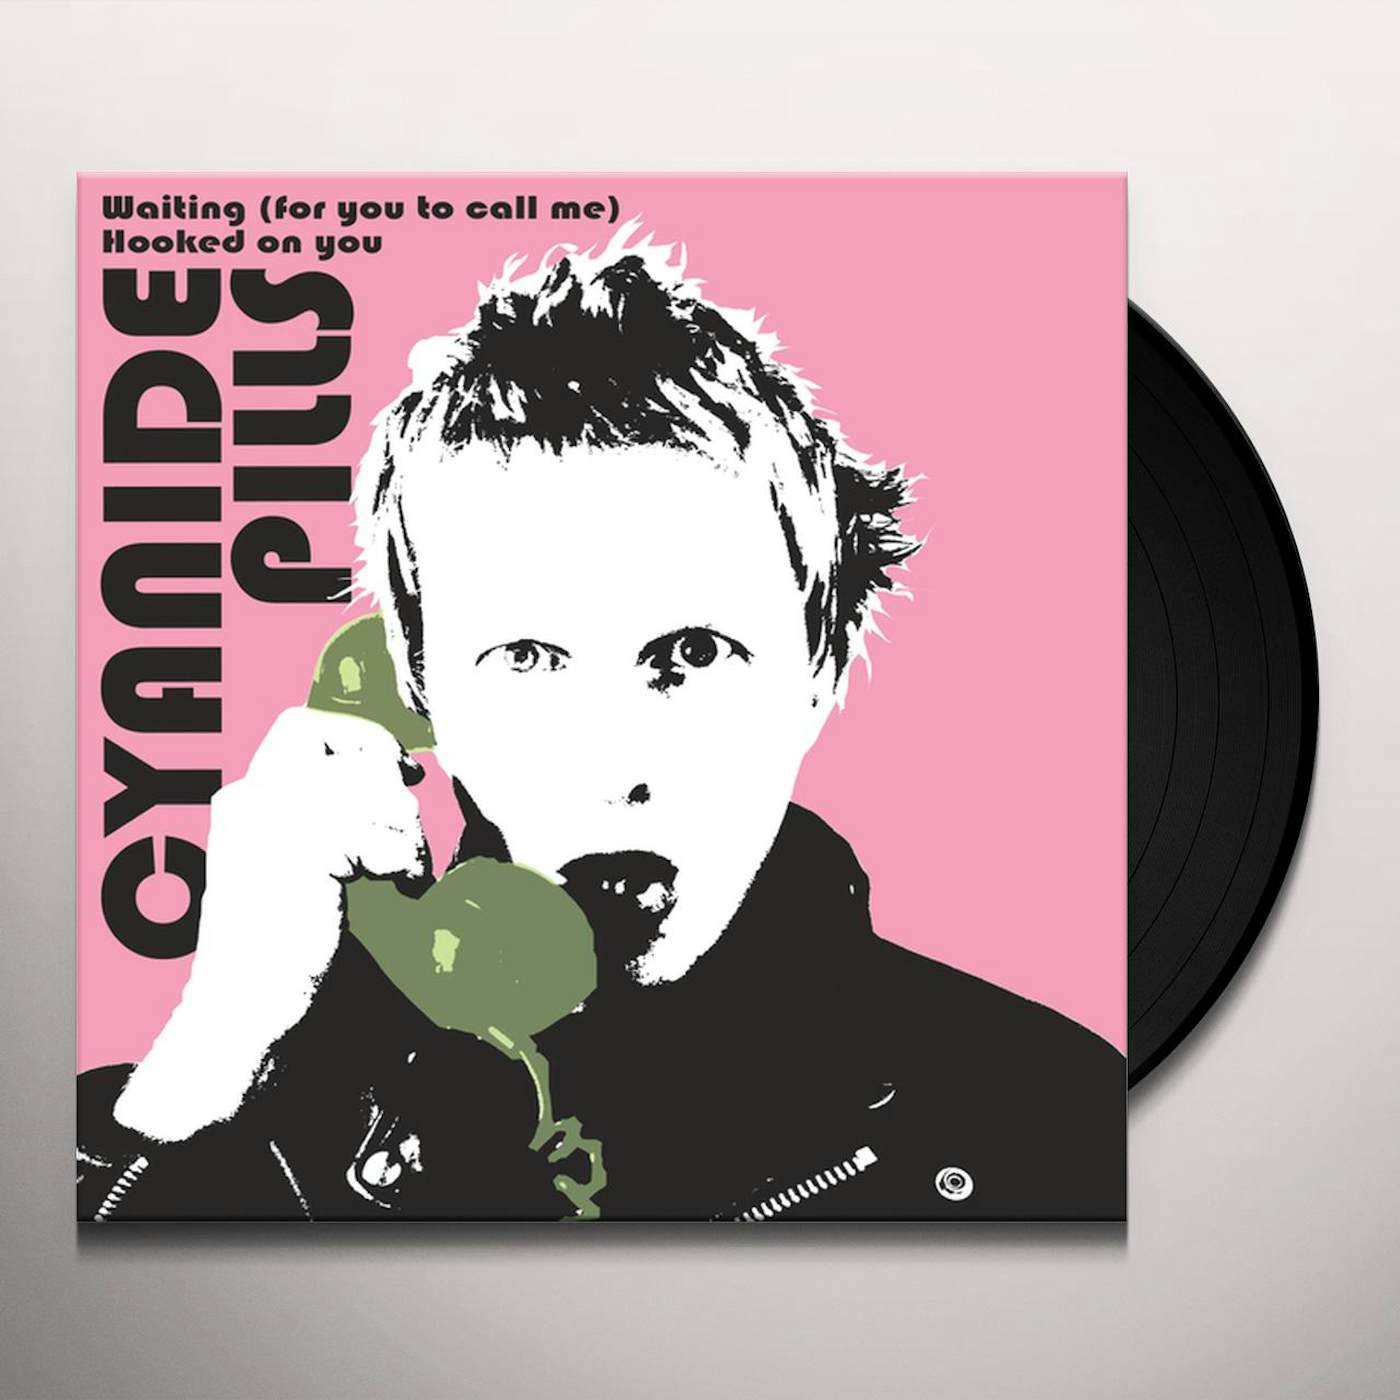 Cyanide Pills Waiting (For You To Call Me)/Hooked On You Vinyl Record